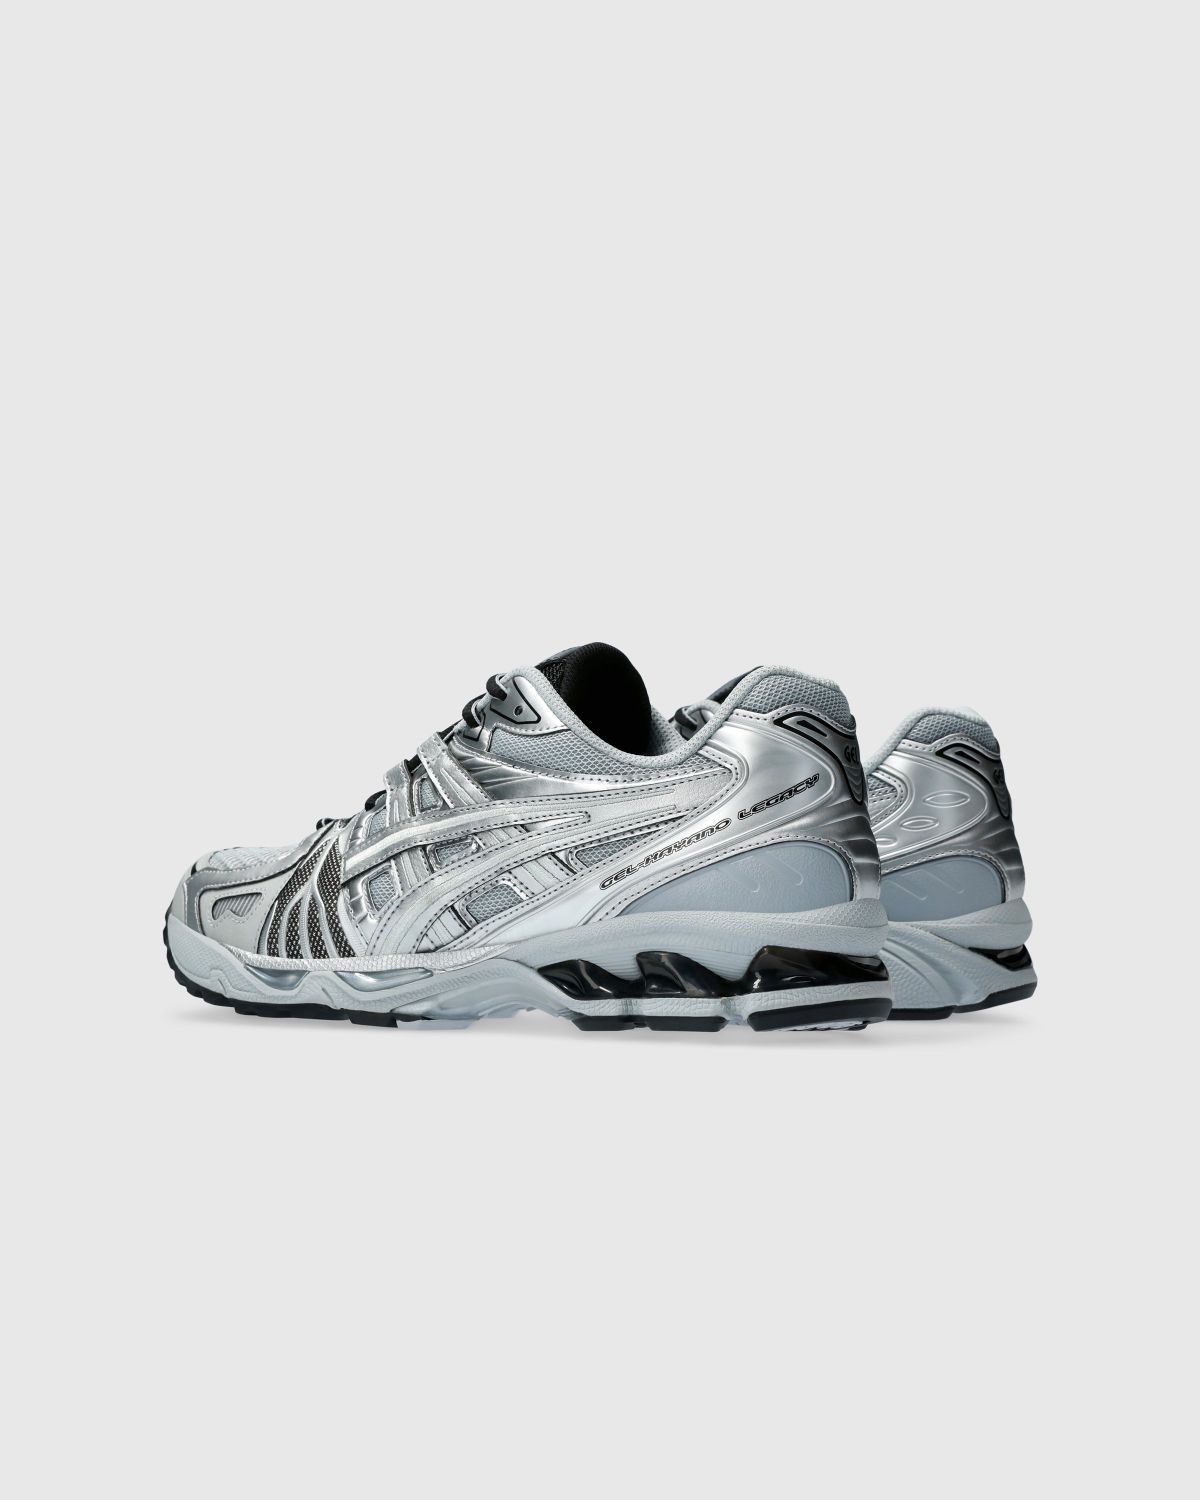 asics – GEL-KAYANO LEGACY Pure Silver - Sneakers - Silver - Image 4